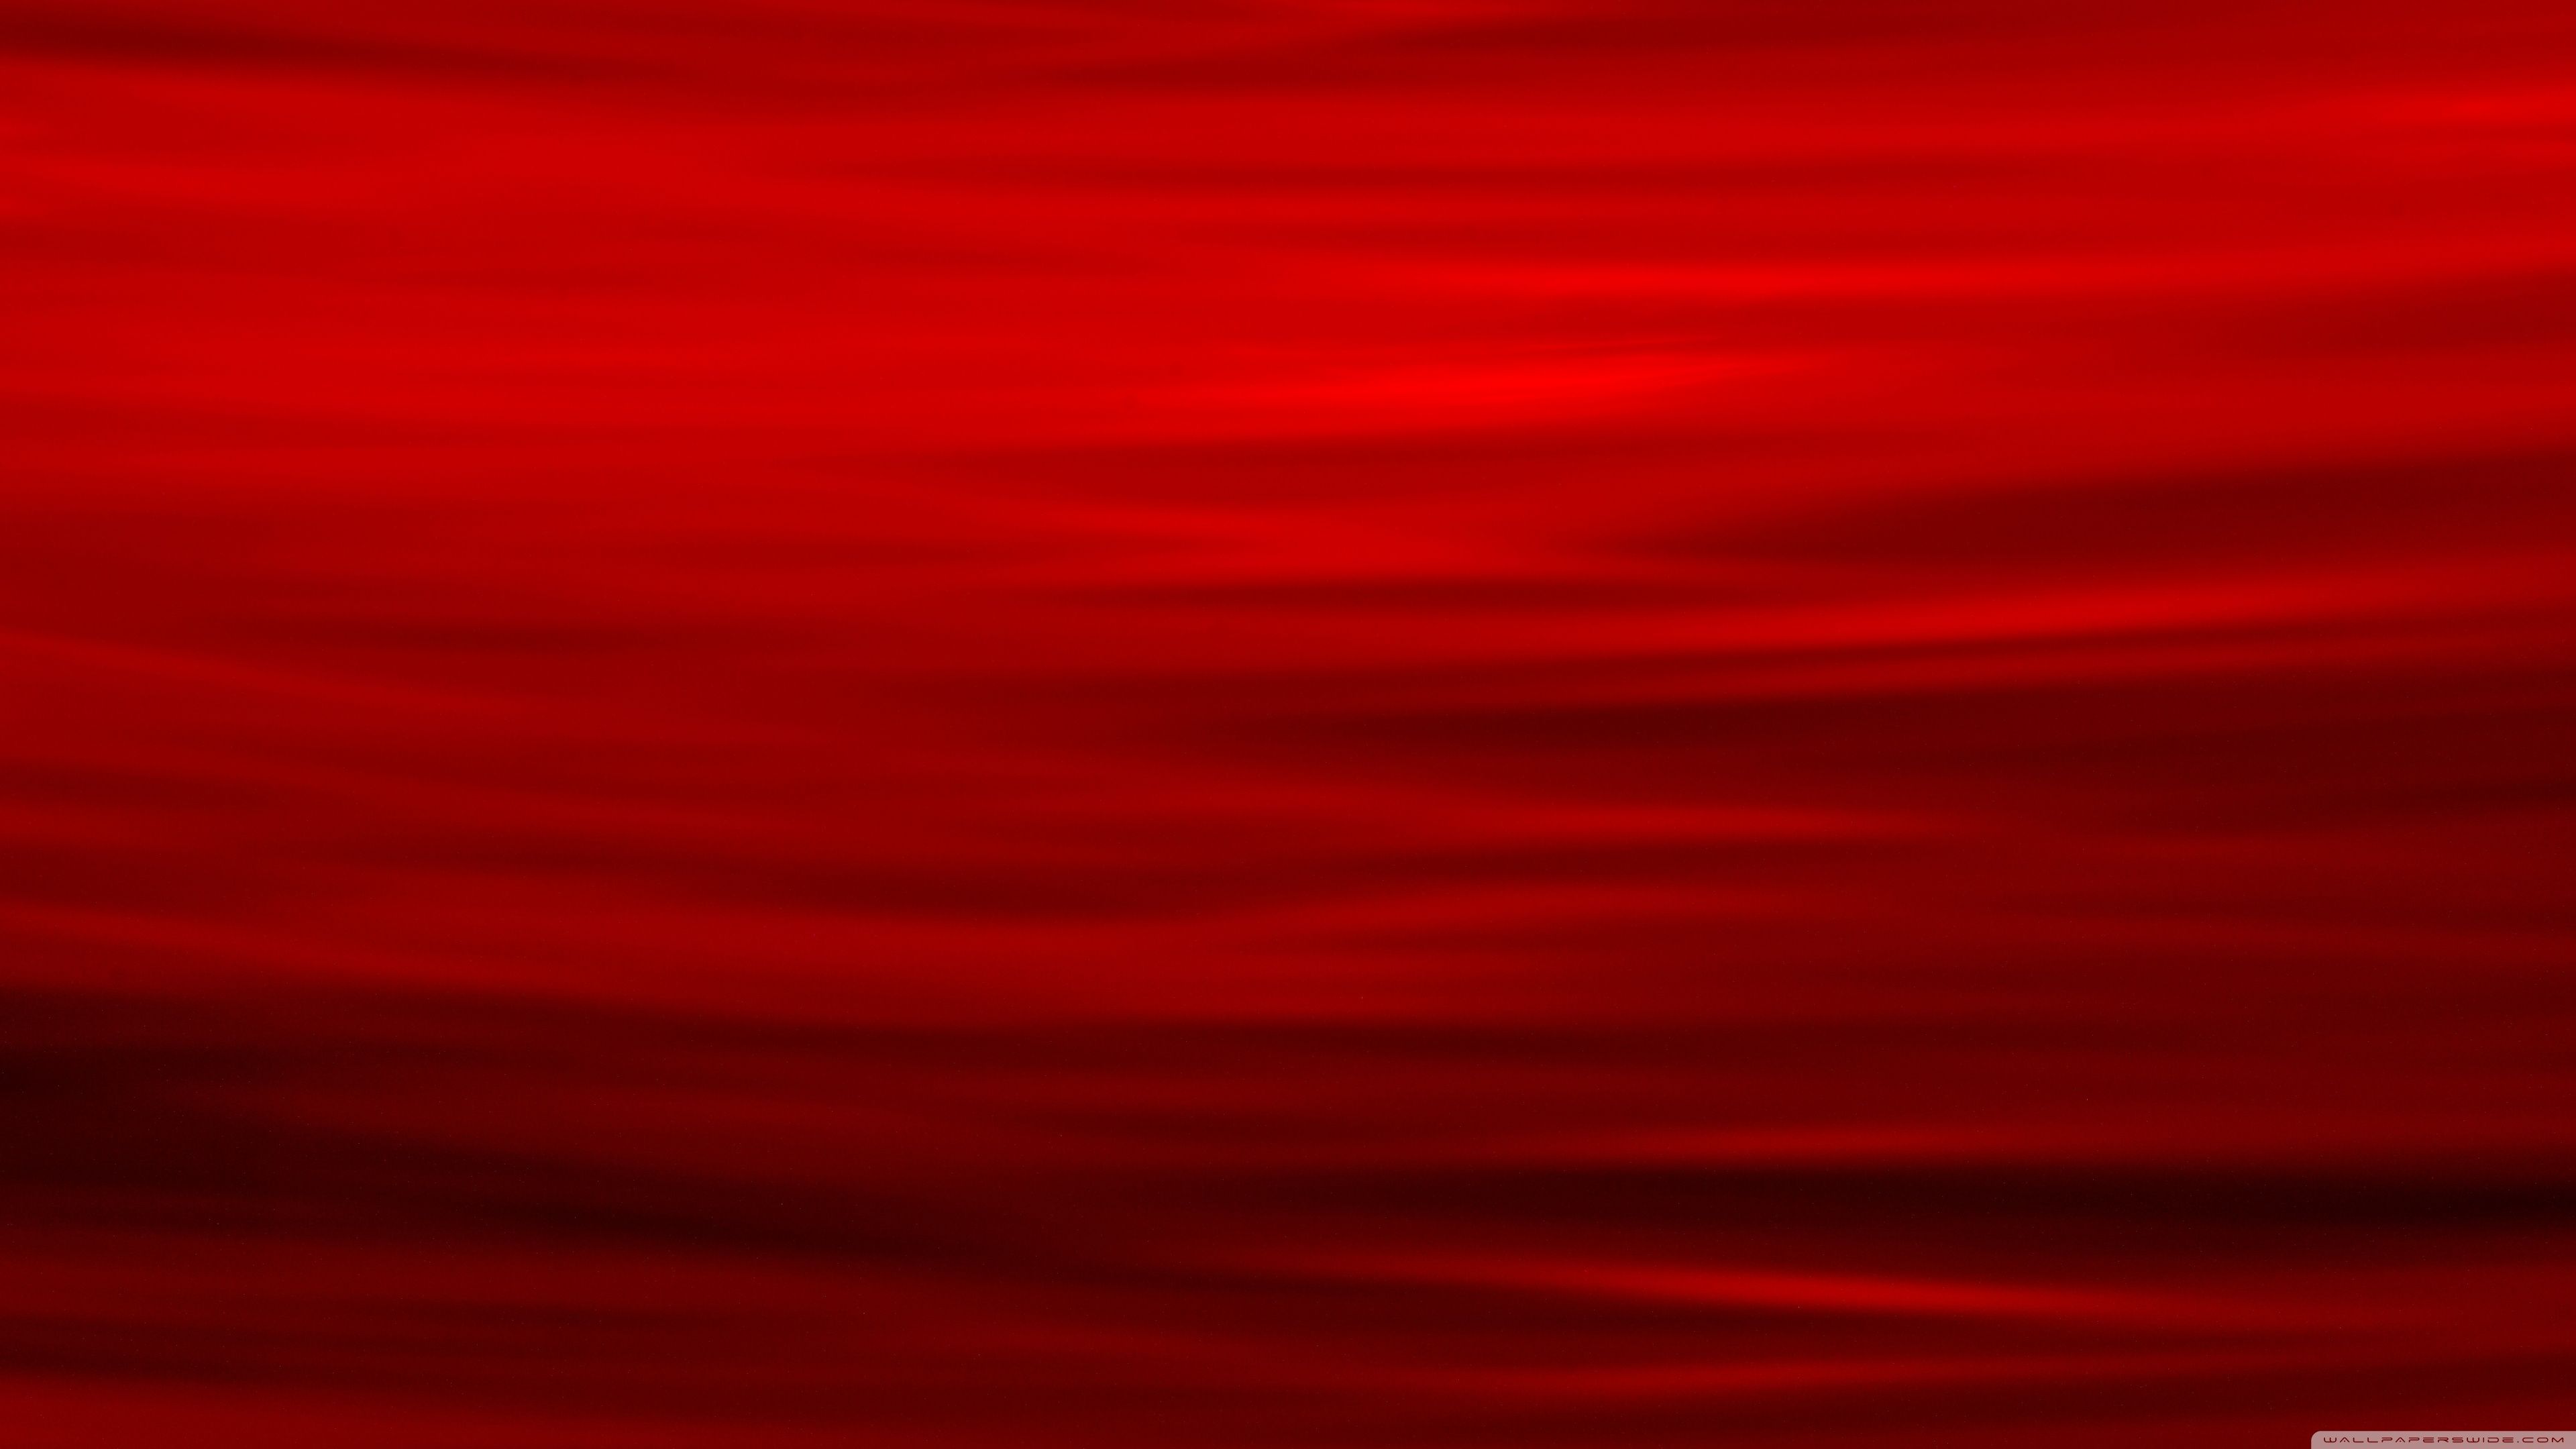 Red 4k Ultra HD Wallpapers - Wallpaper Cave